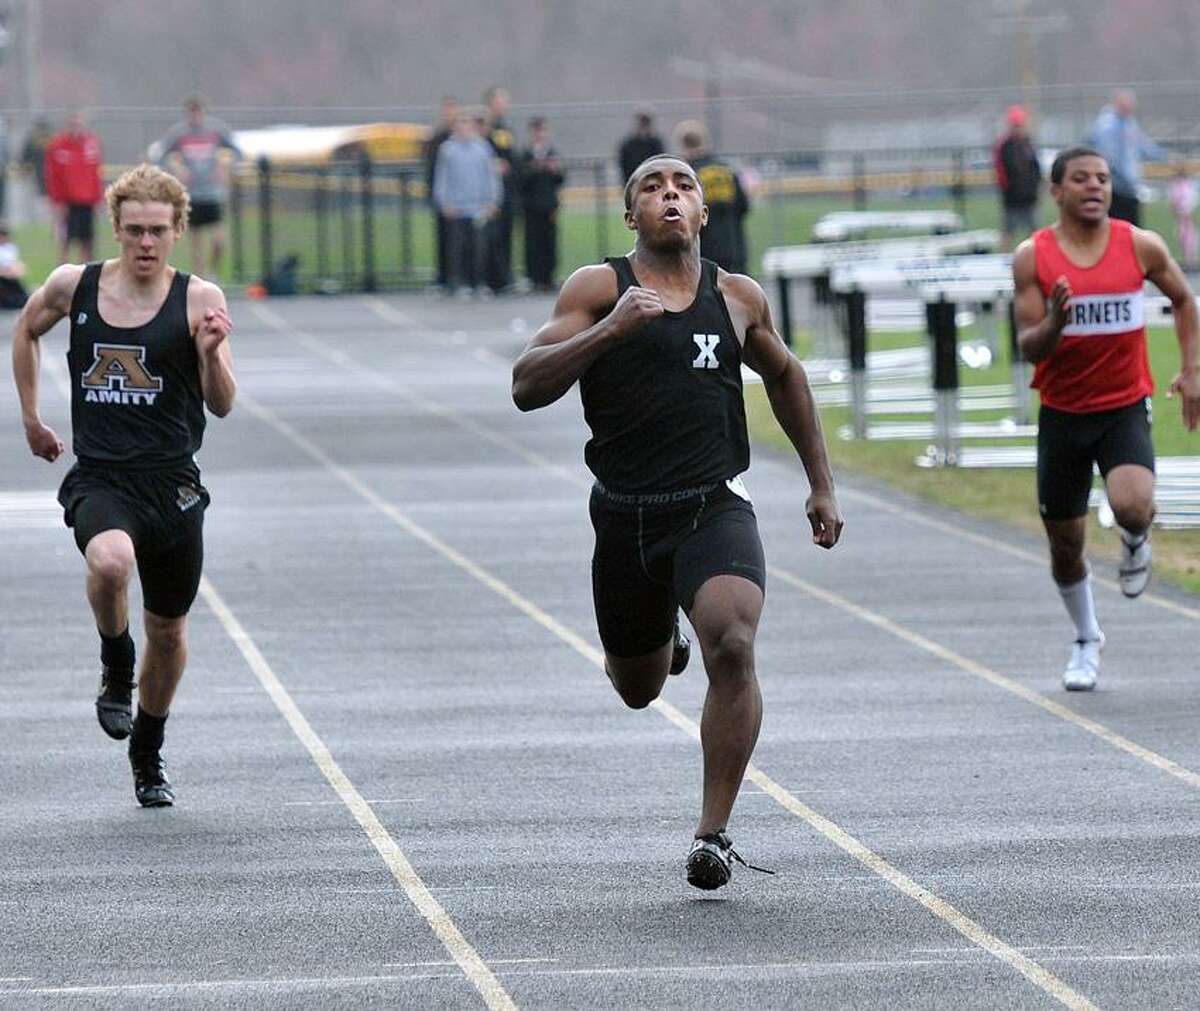 Amity-- Xavier's DeAngelo Berry, center, on his way to a win in the 200-meter at the track meet hosted by Amity High. Photo-Peter Casolino/Register pcasolino@newhavenregister.com